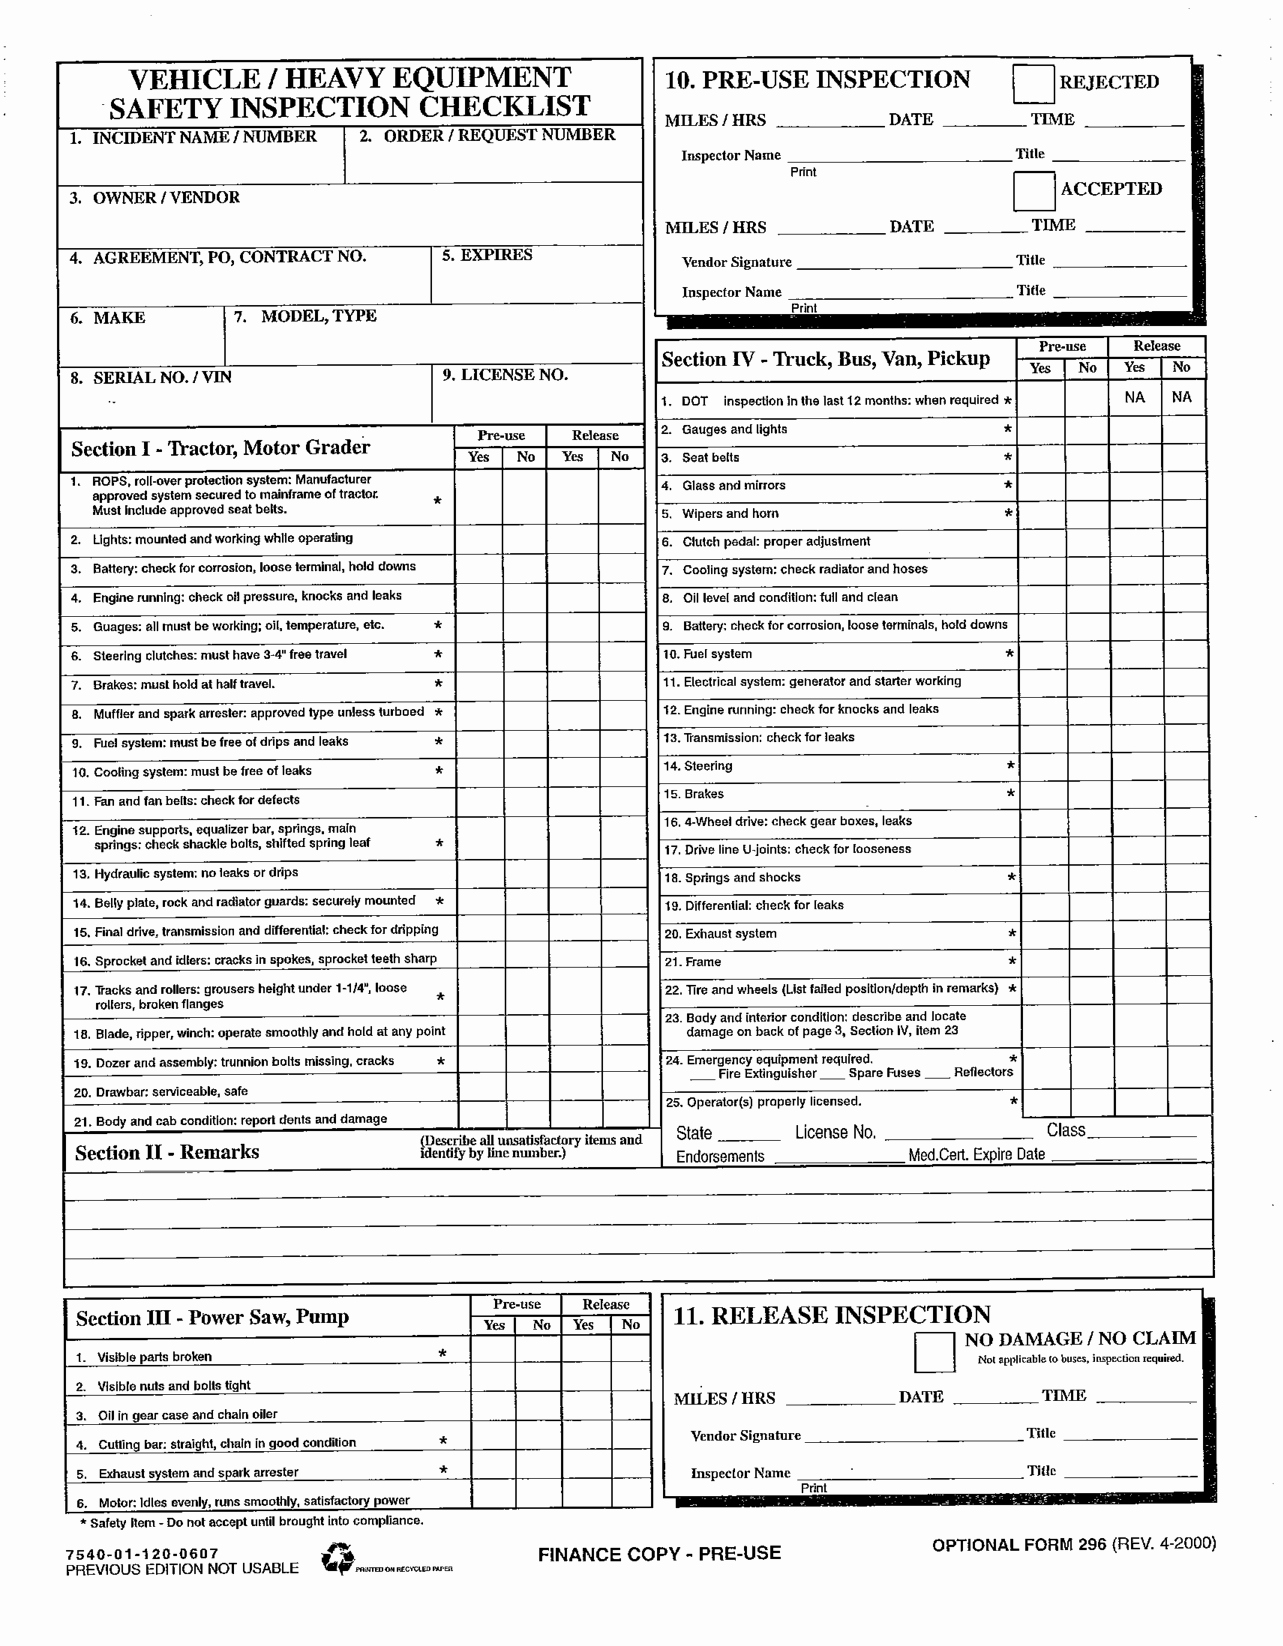 Vehicle Safety Inspection Checklist Template Luxury Black and White Clipart Car Inspection Check List Clipground